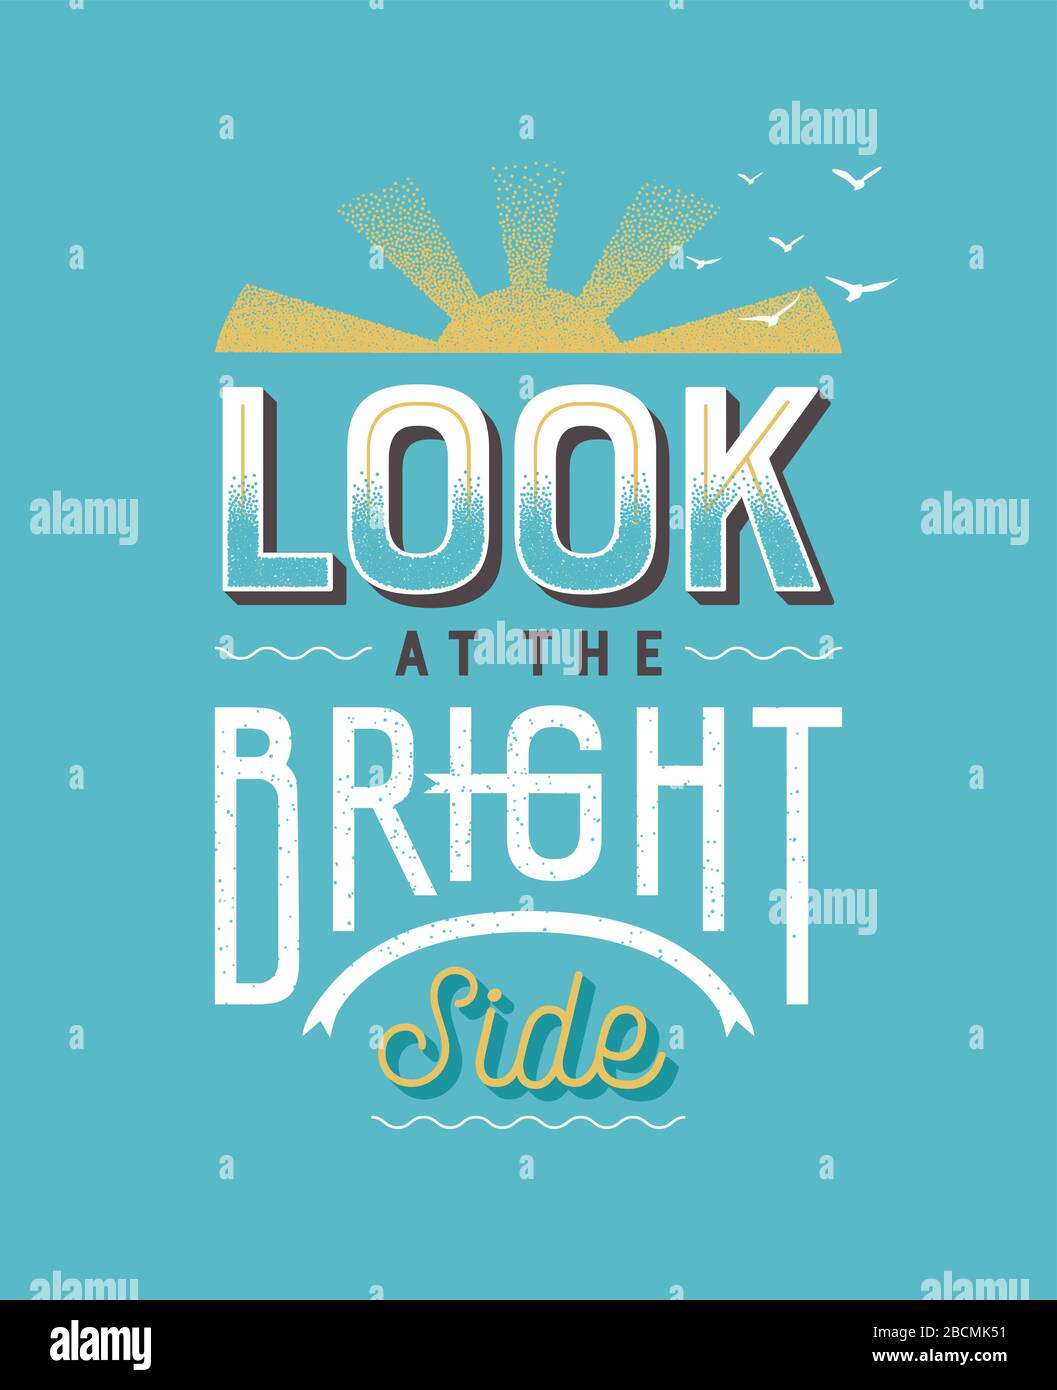 Look at the bright side vintage typography quote illustration. Retro style lettering text design with motivational message for inspiration, positivity Stock Vector